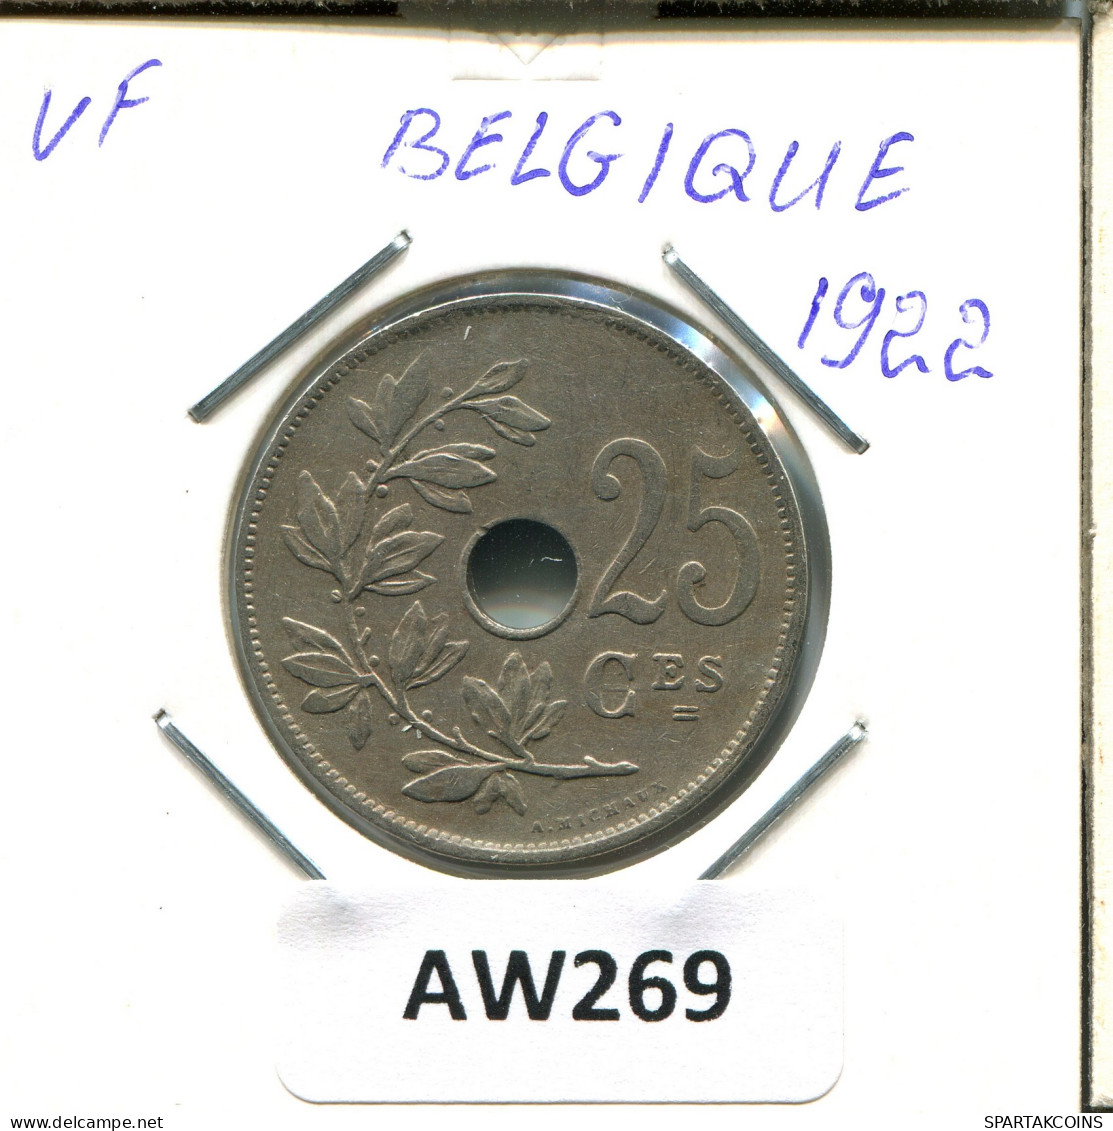 25 CENTIMES 1922 FRENCH Text BELGIUM Coin #AW269.U - 25 Cents